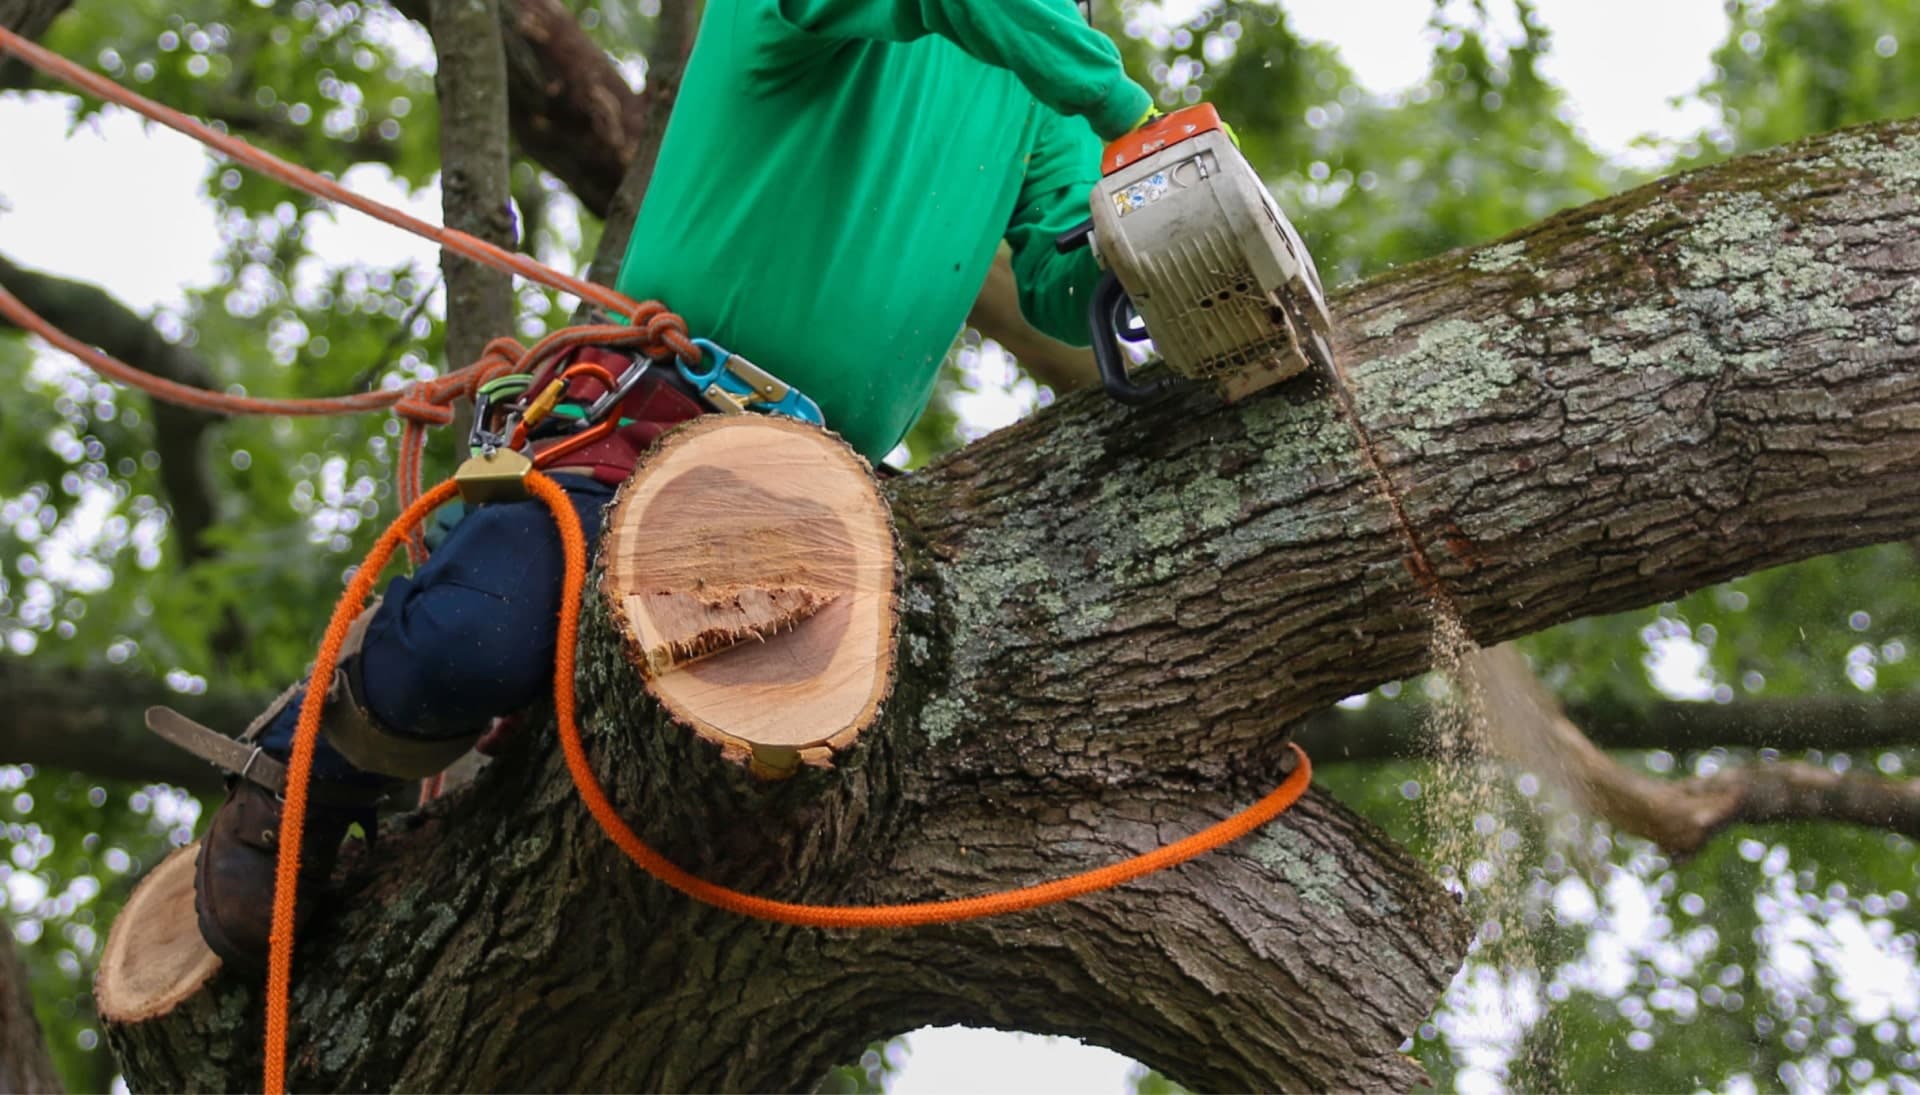 Shed your worries away with best tree removal in Las Vegas